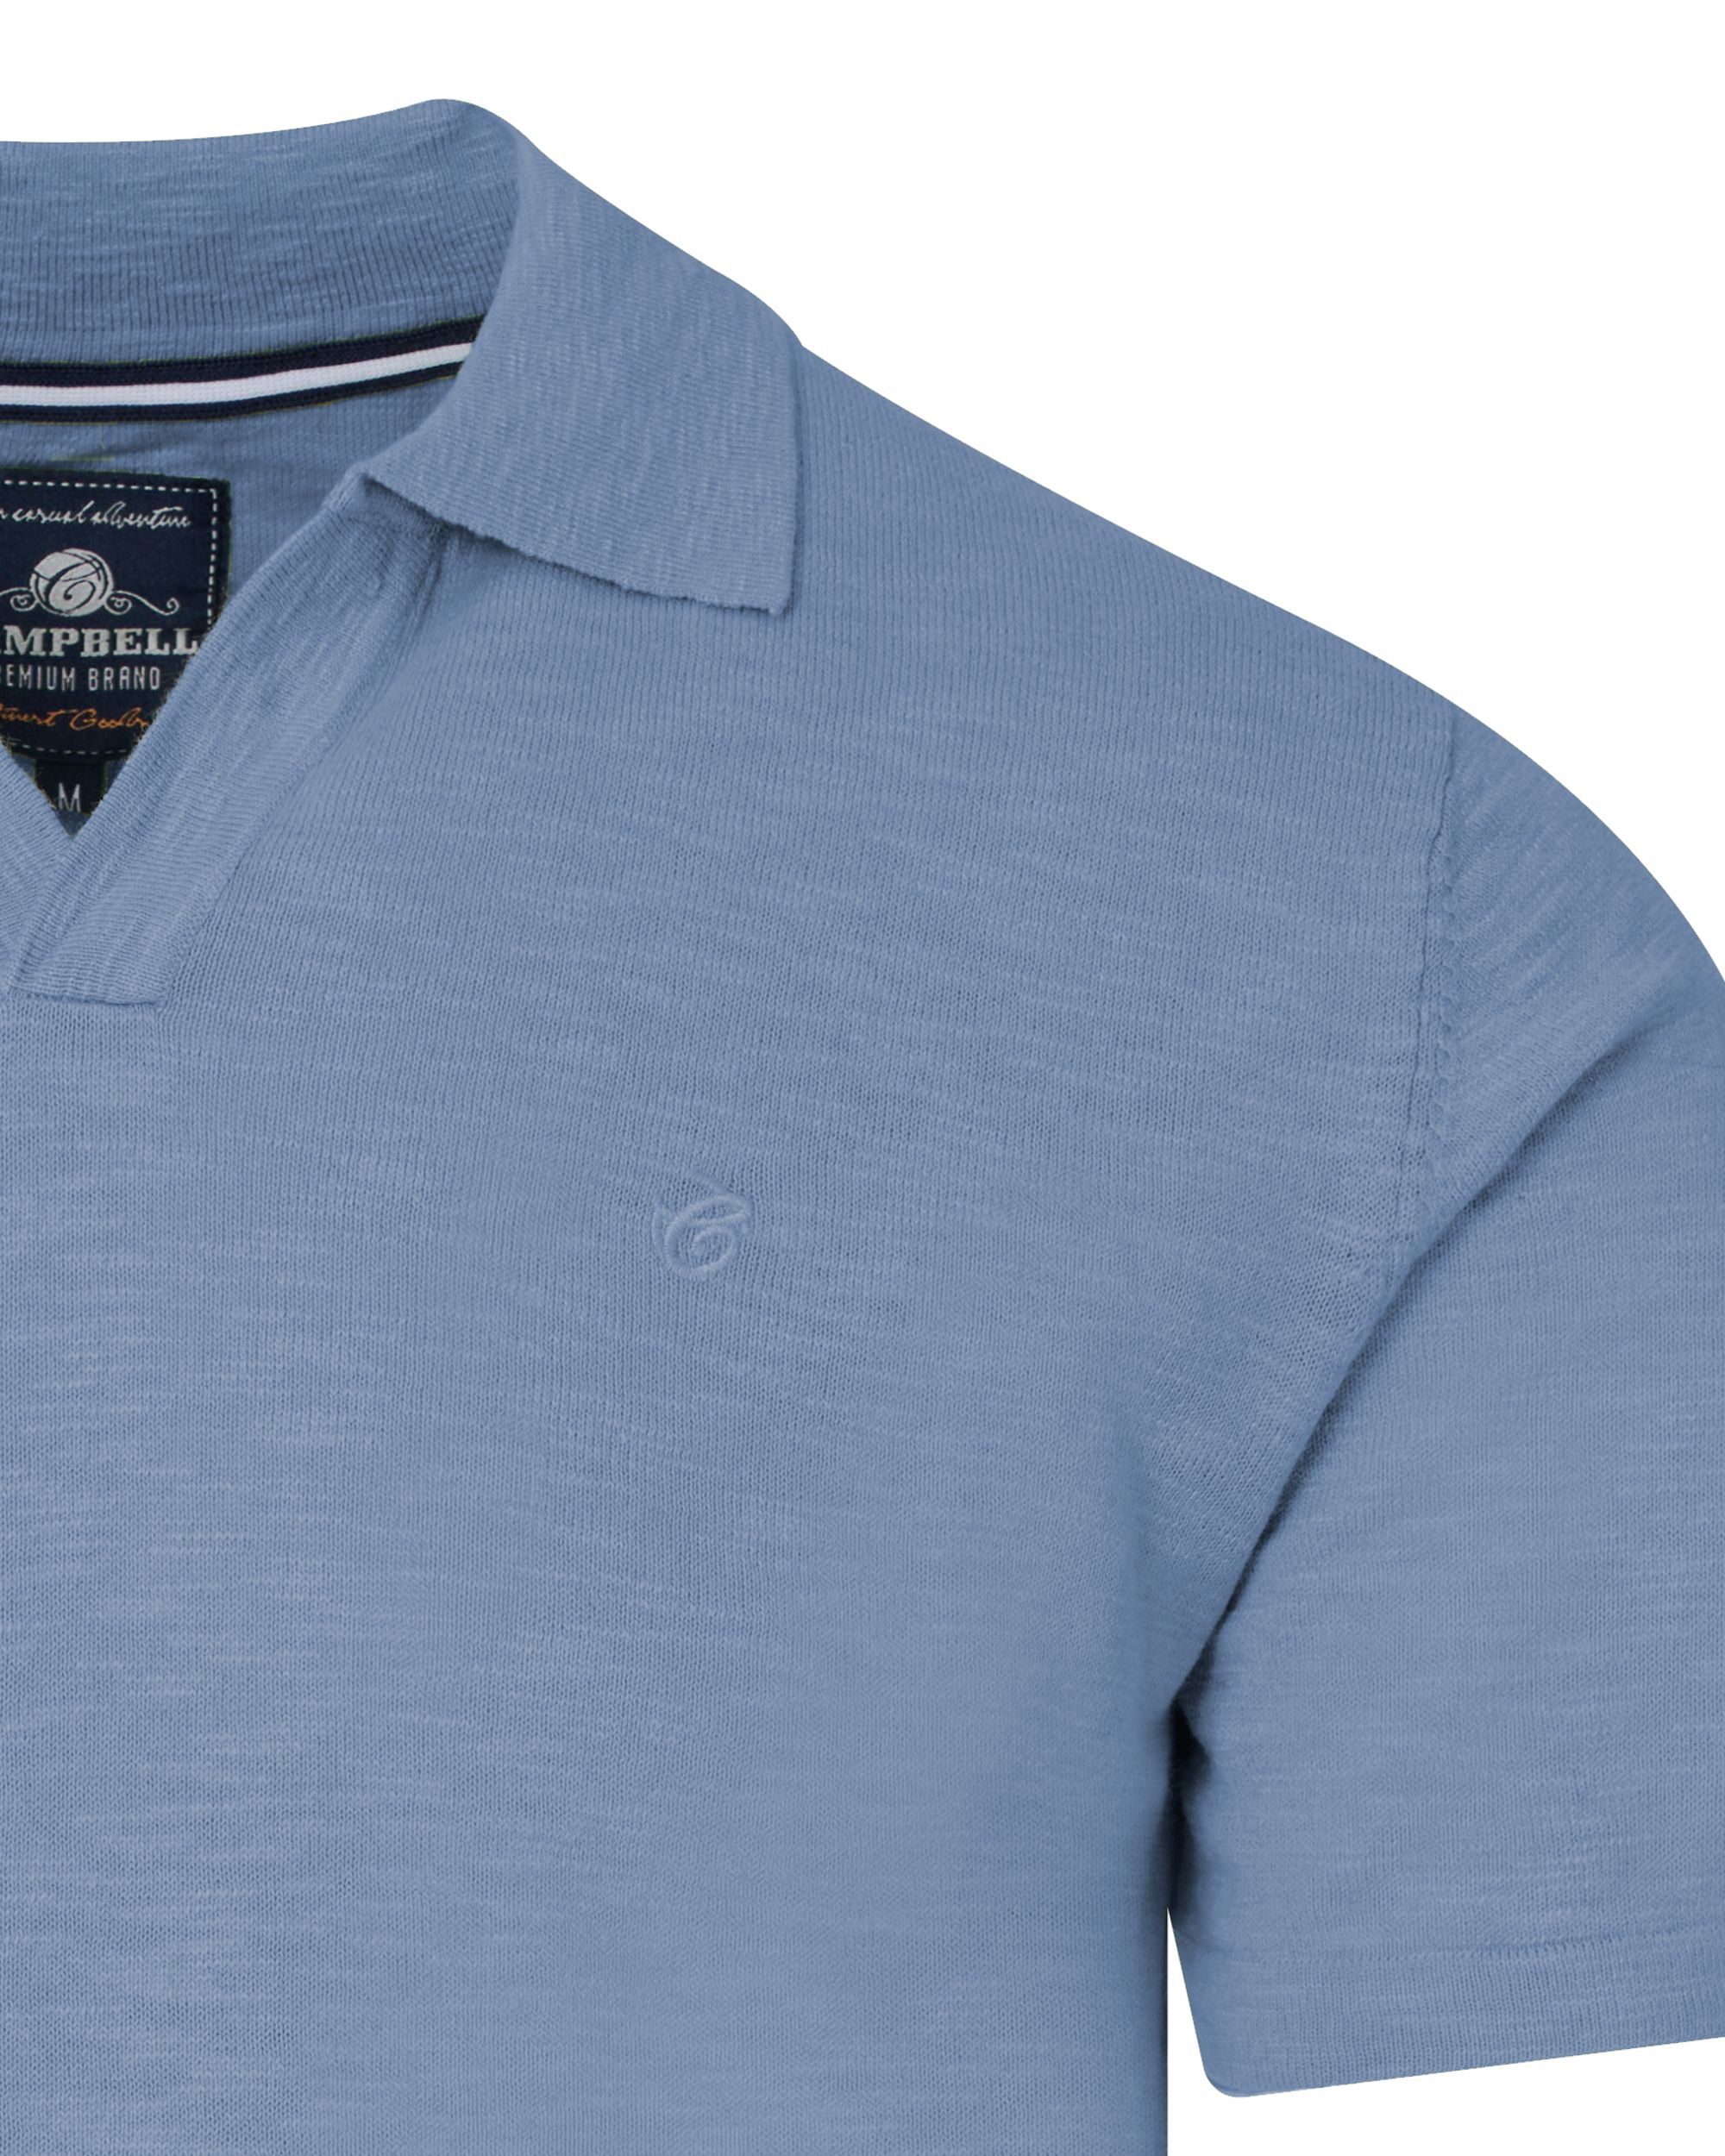 Campbell Classic Nelson Polo KM Country Blue 089149-003-L